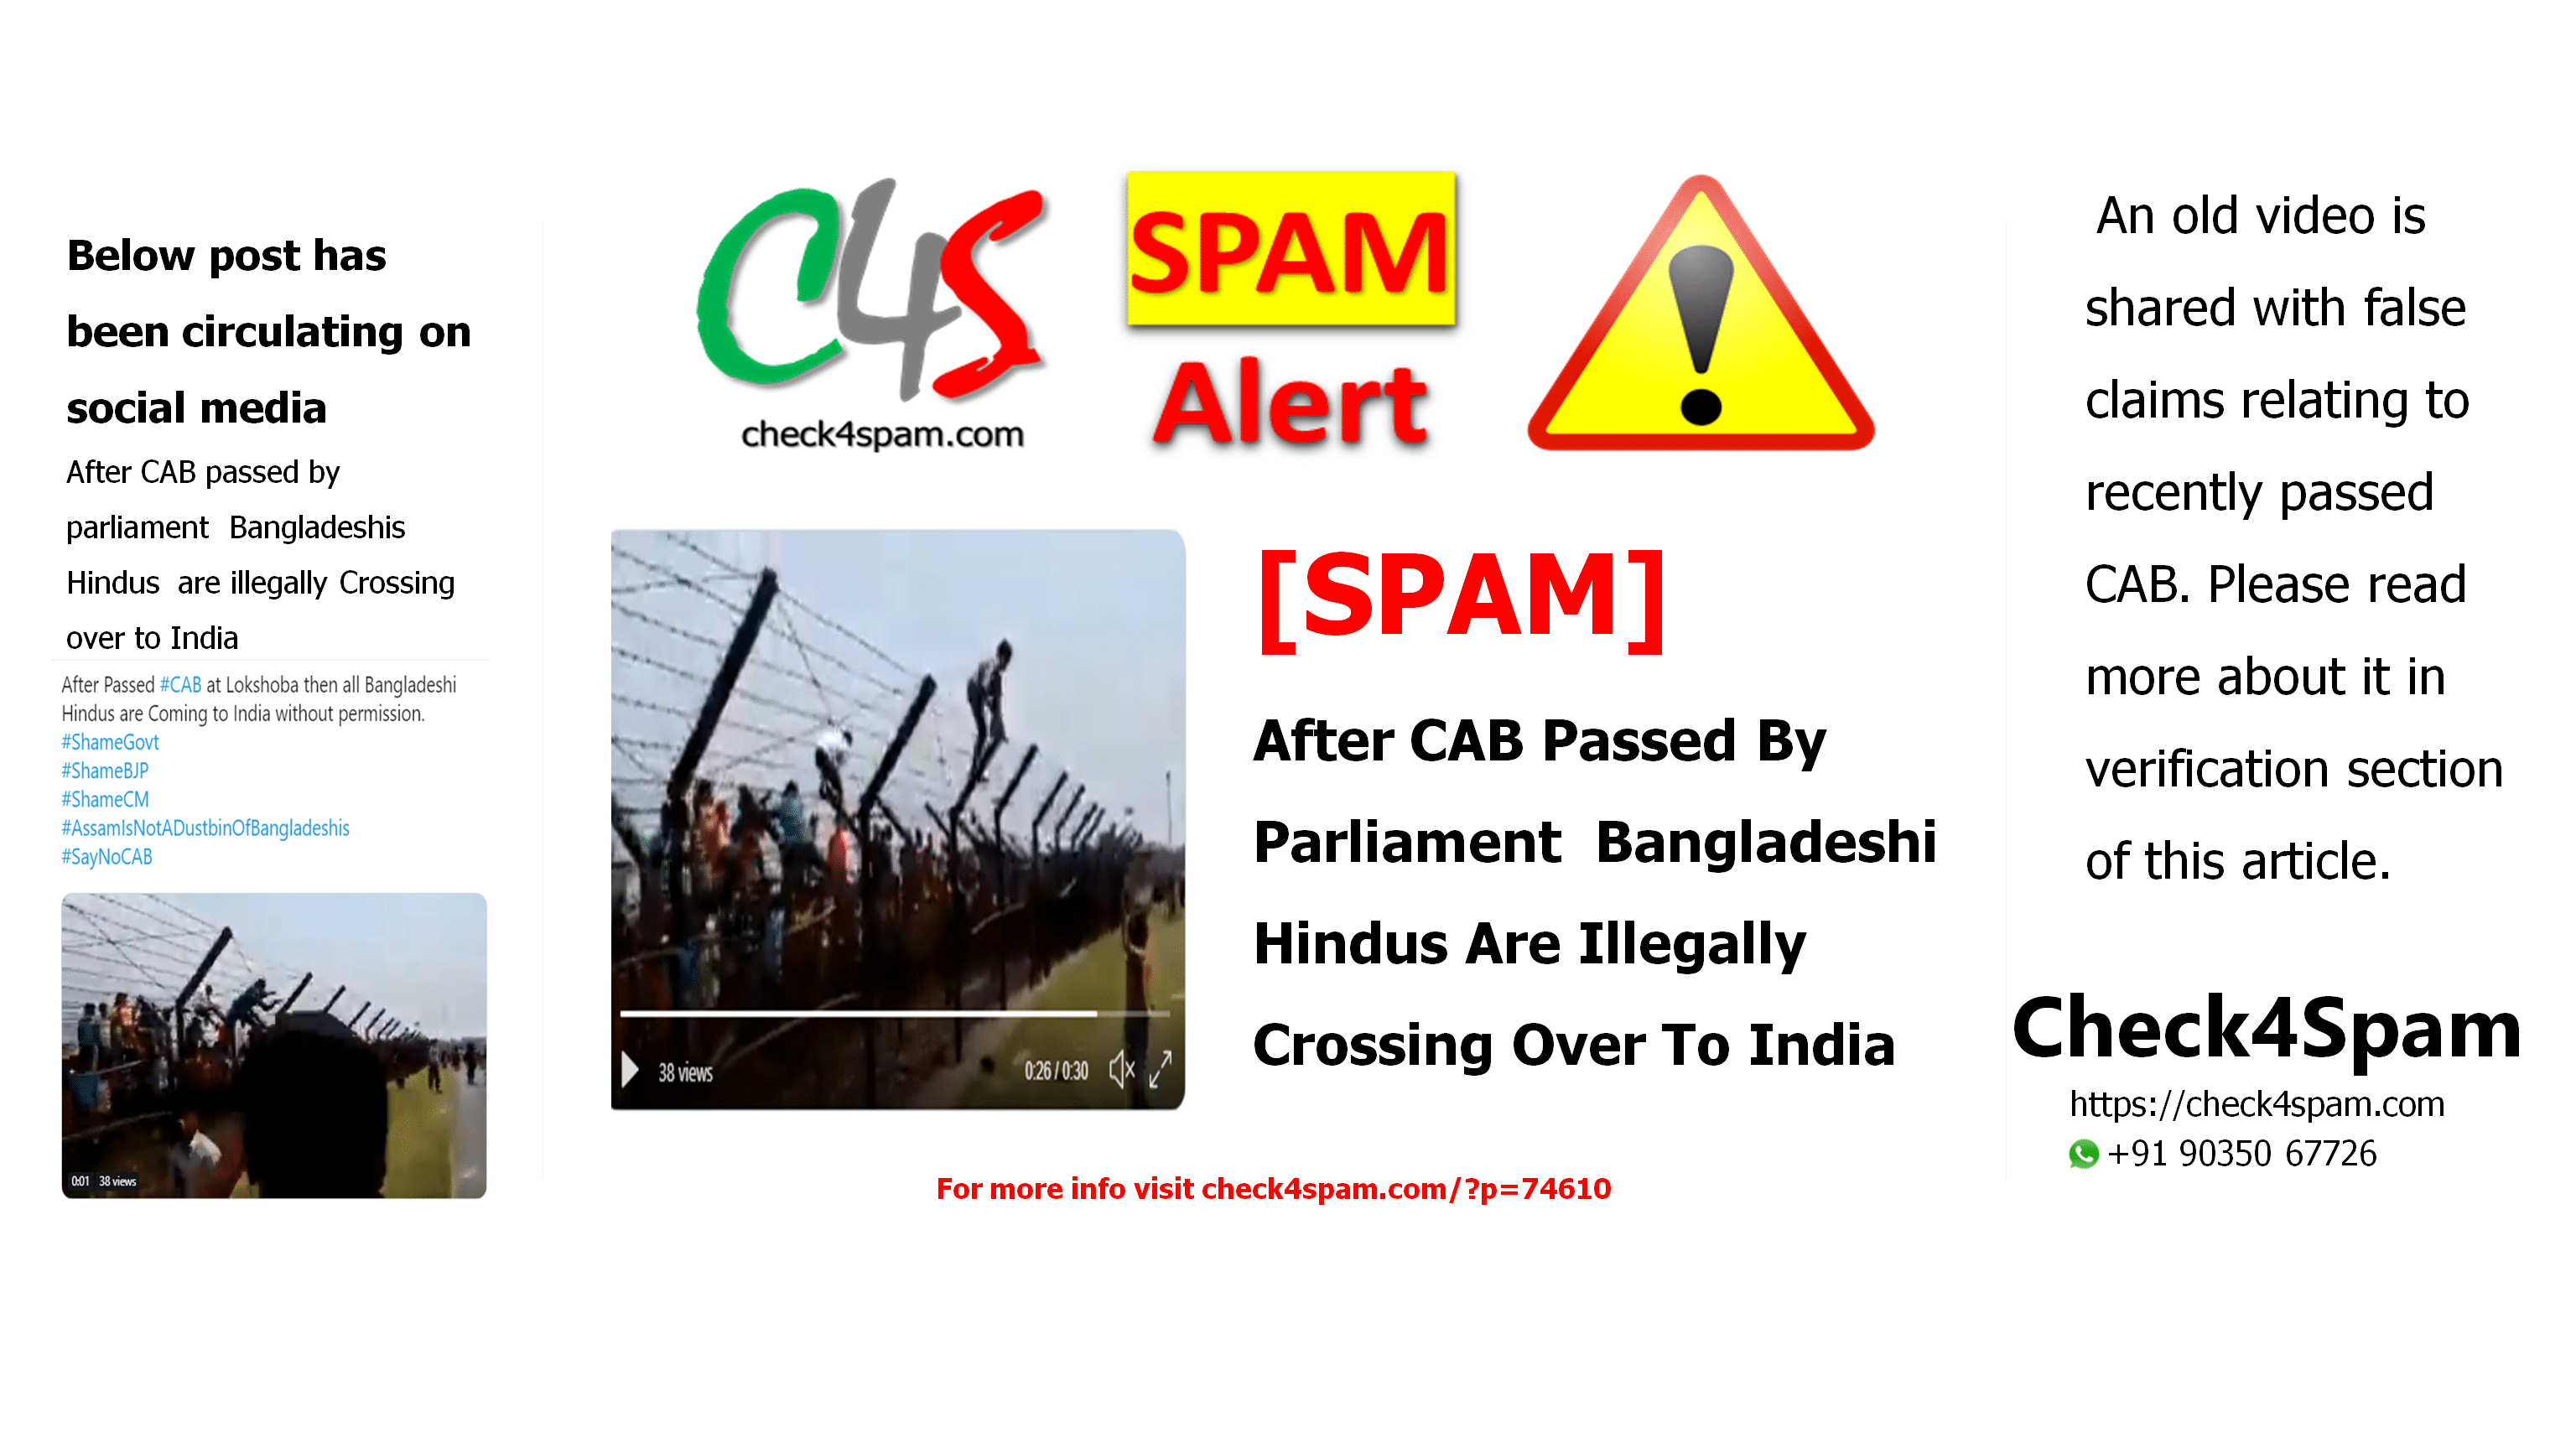 After CAB Passed By Parliament Bangladeshi Hindus Are Illegally Crossing Over To India